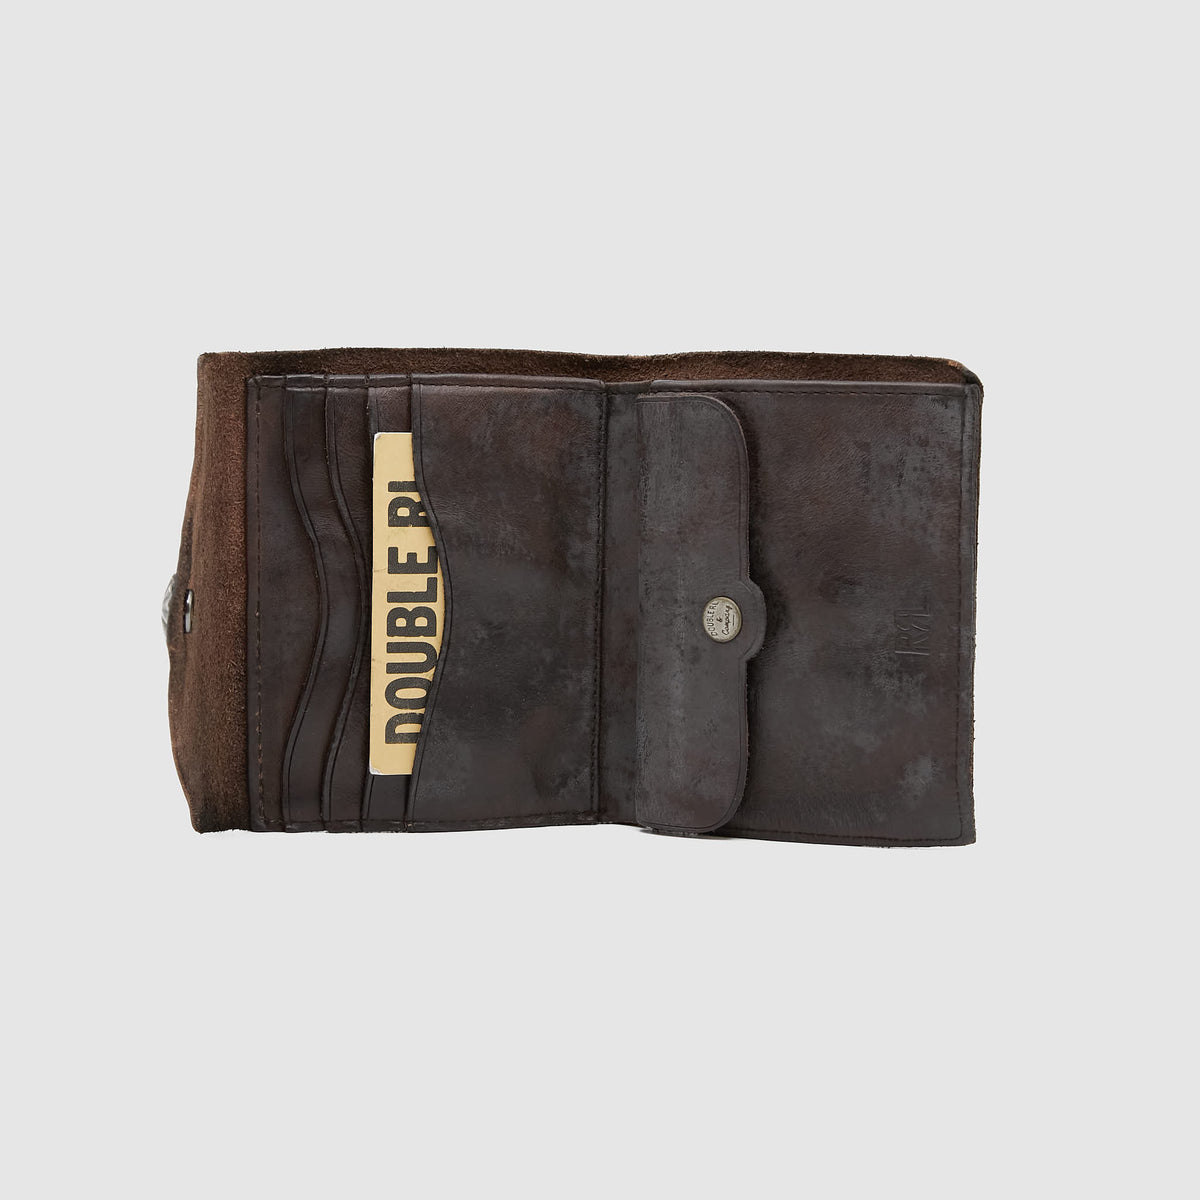 Double RL Leather Concho Wallet